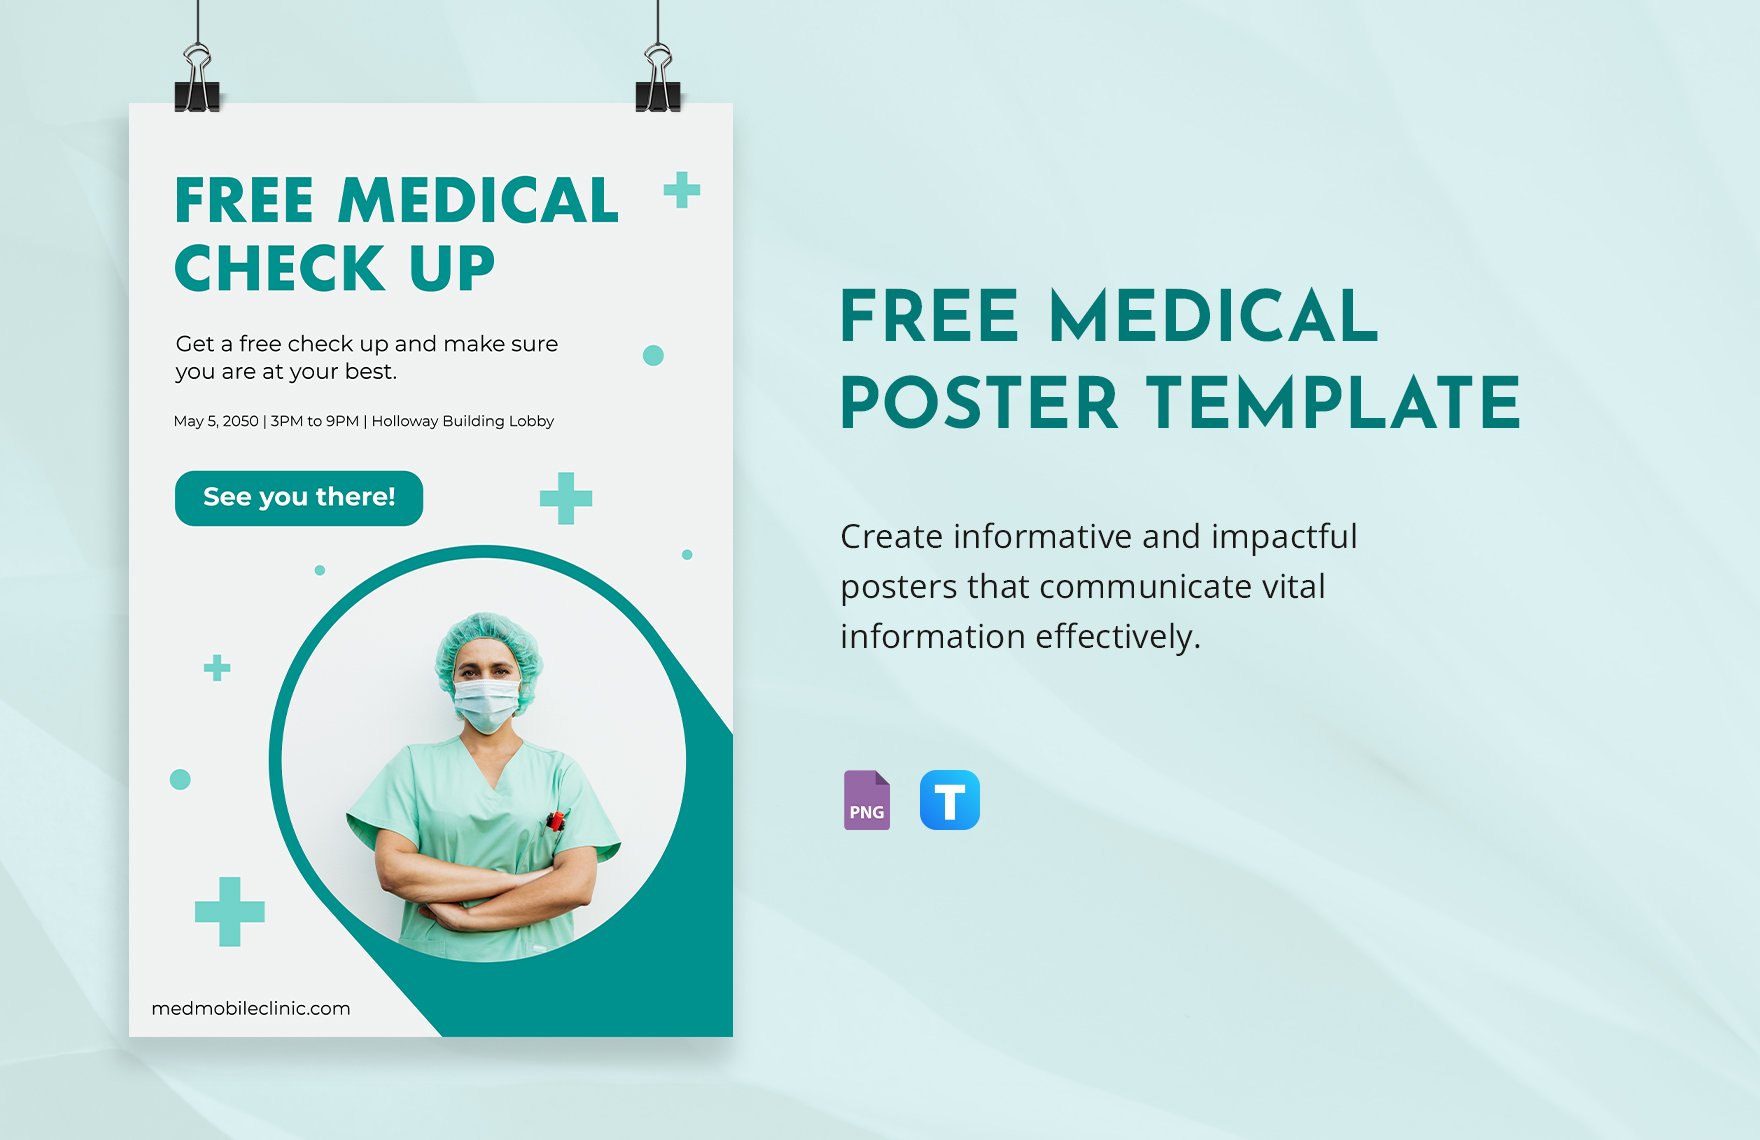 Free Medical Poster Template in PNG